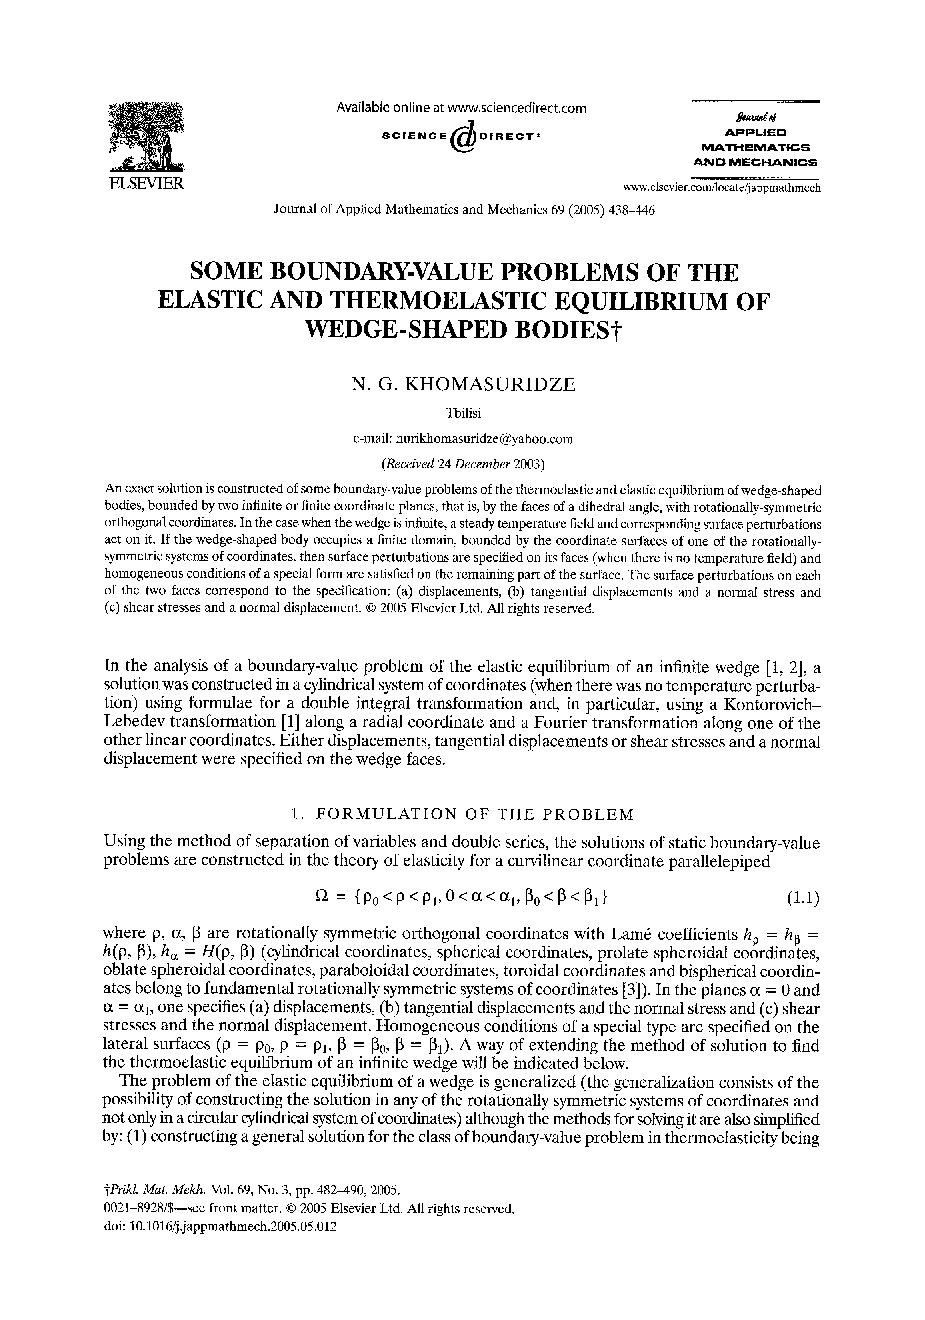 Some boundary-value problems of the elastic and thermoelastic equilibrium of wedge-shaped bodies